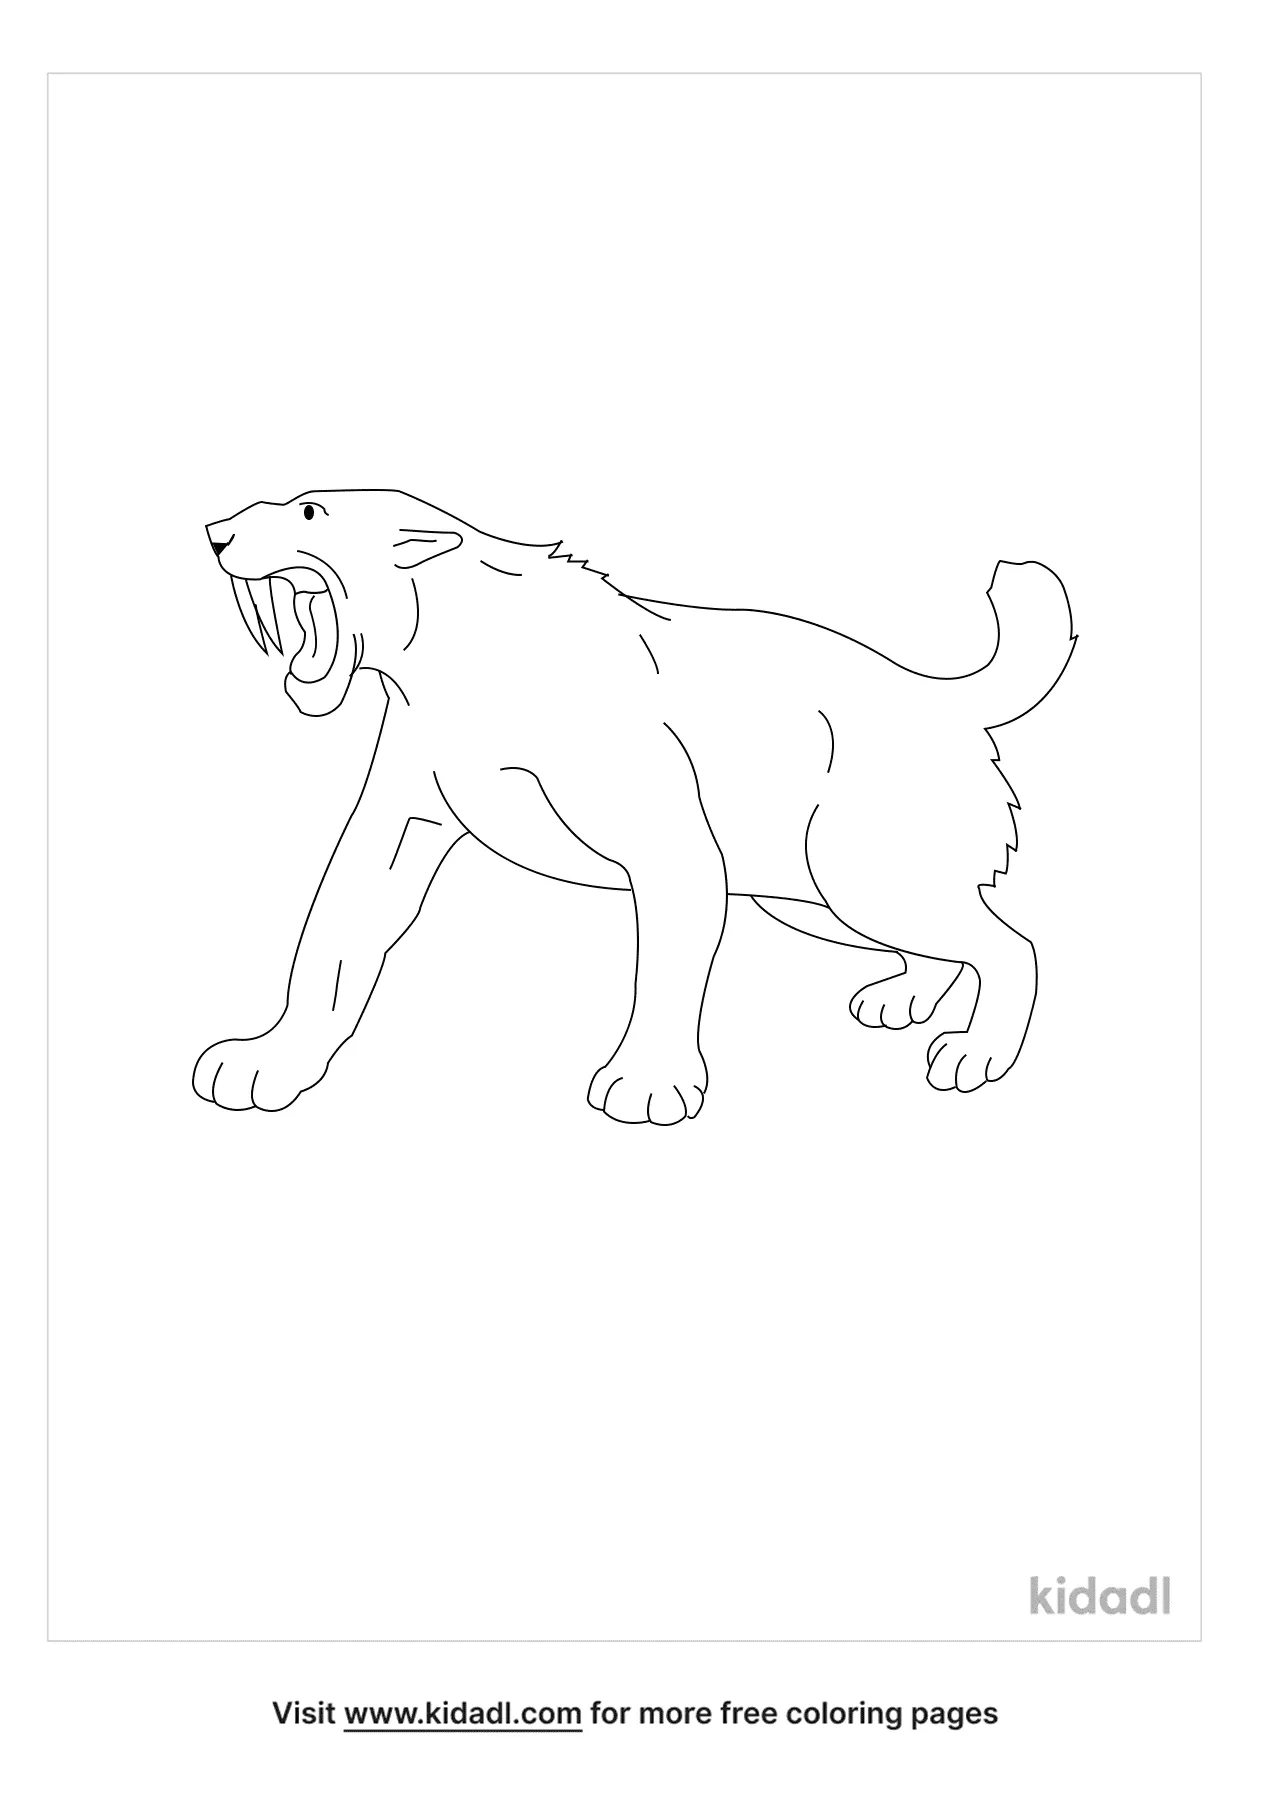 Free saber tooth tiger coloring page coloring page printables